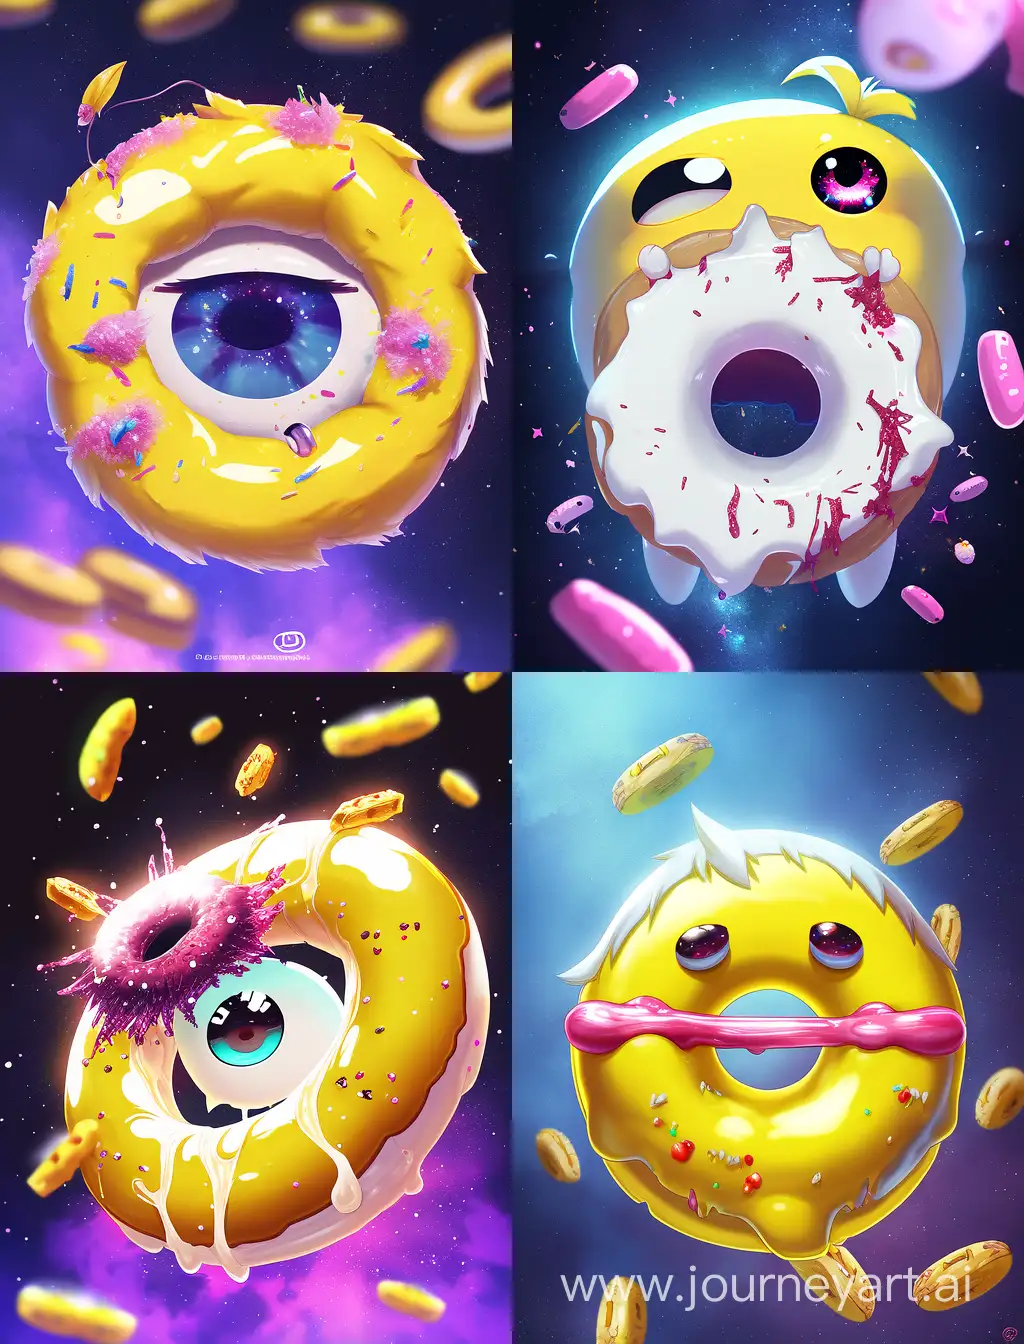 donut with eyes and lips with banana piercing it through the center and staffing dripping off banana on cosmos background